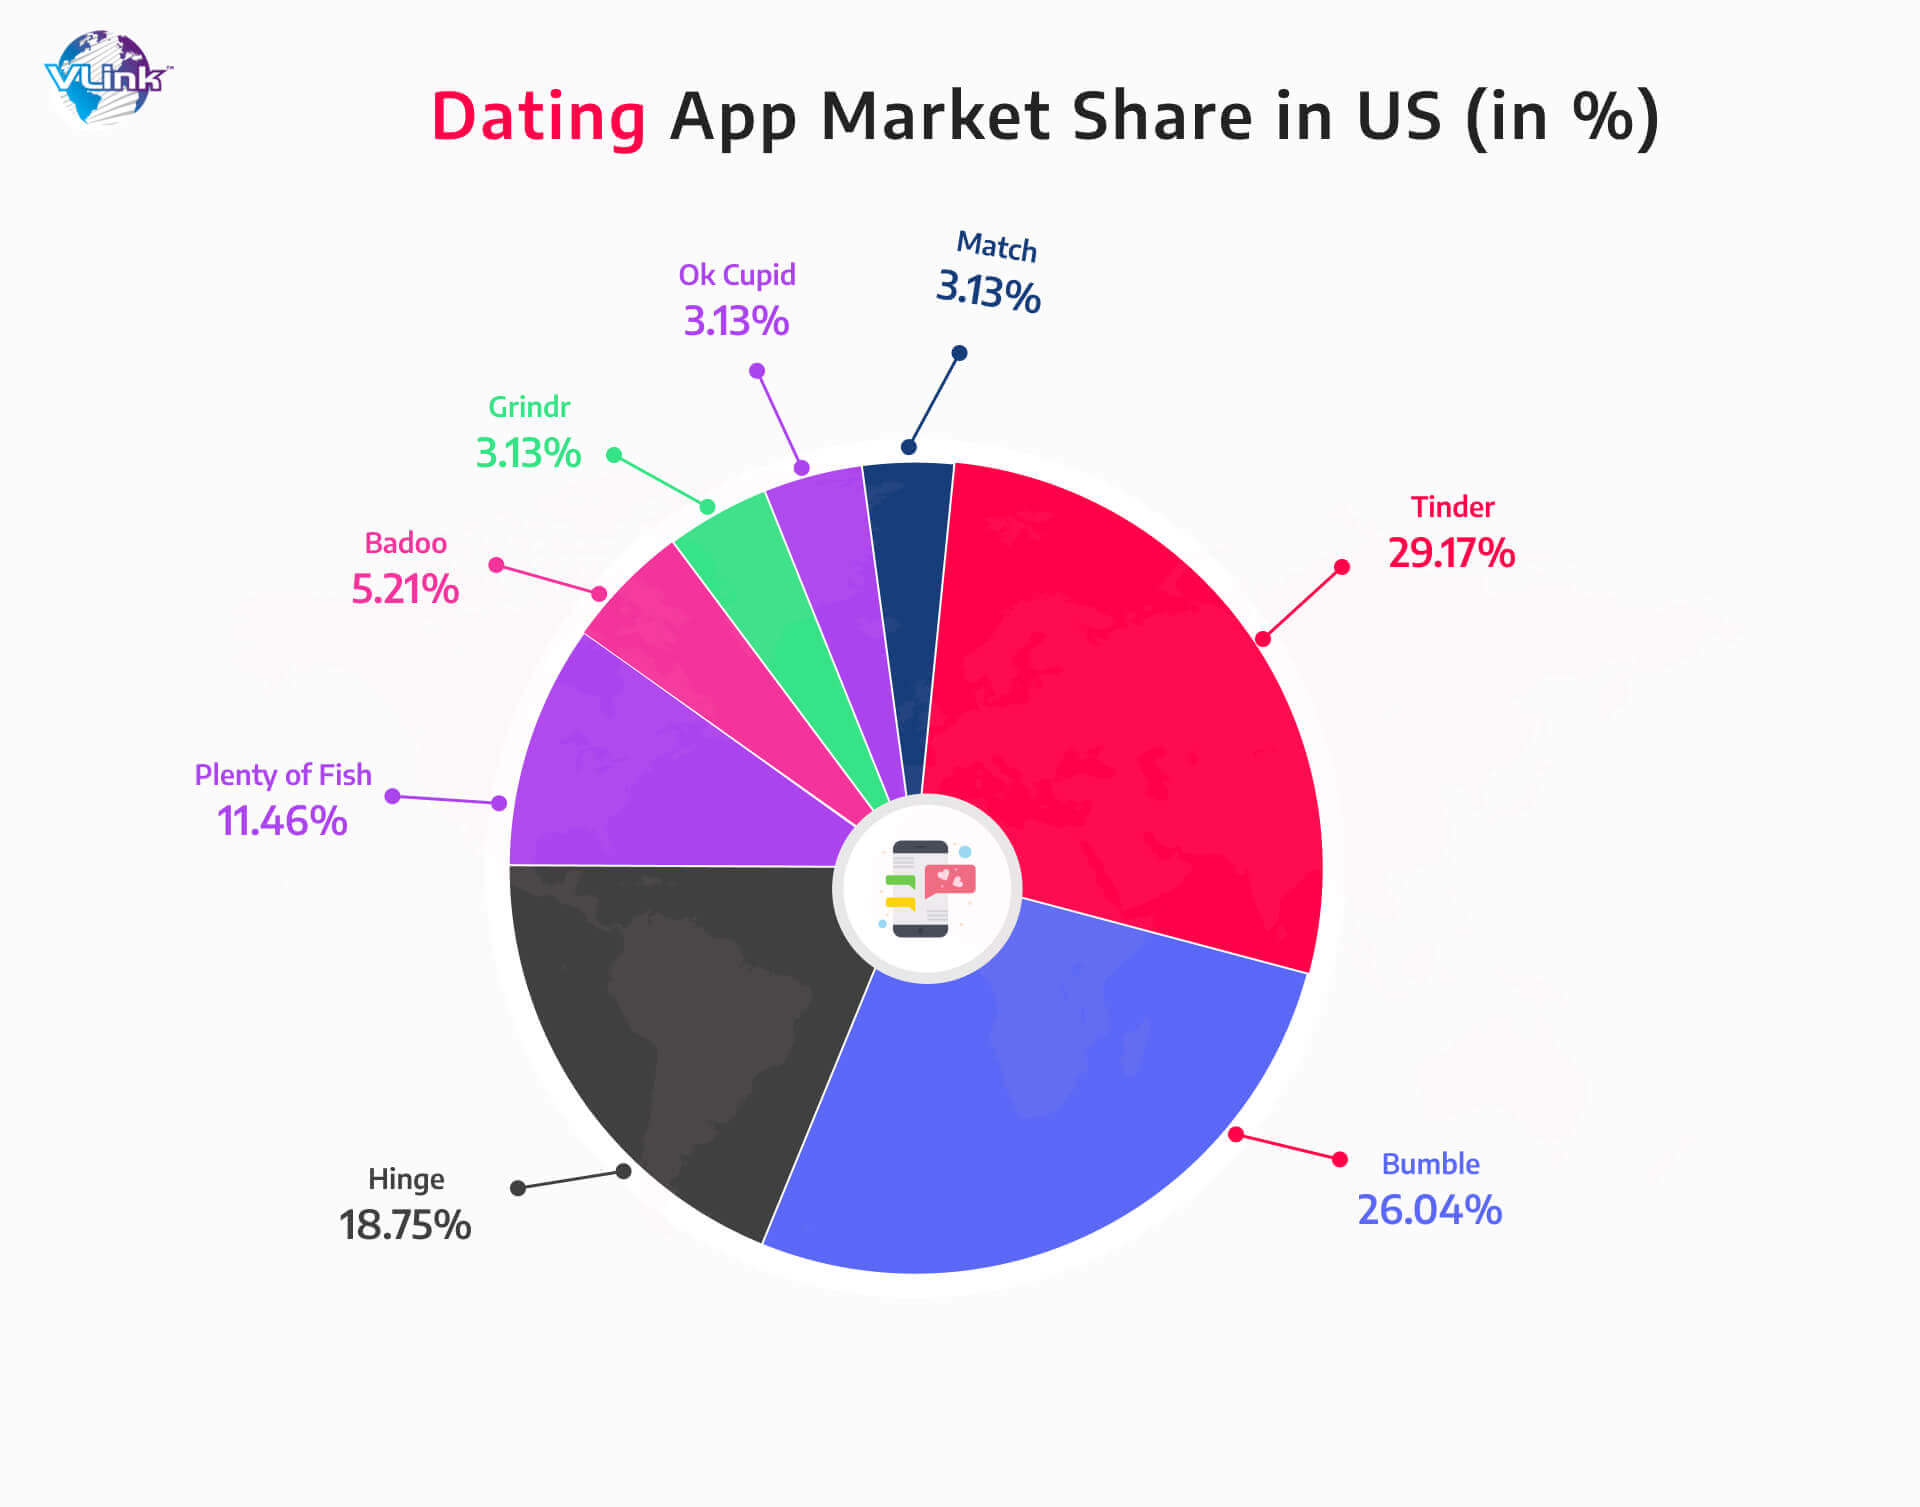 Dating app market share in US